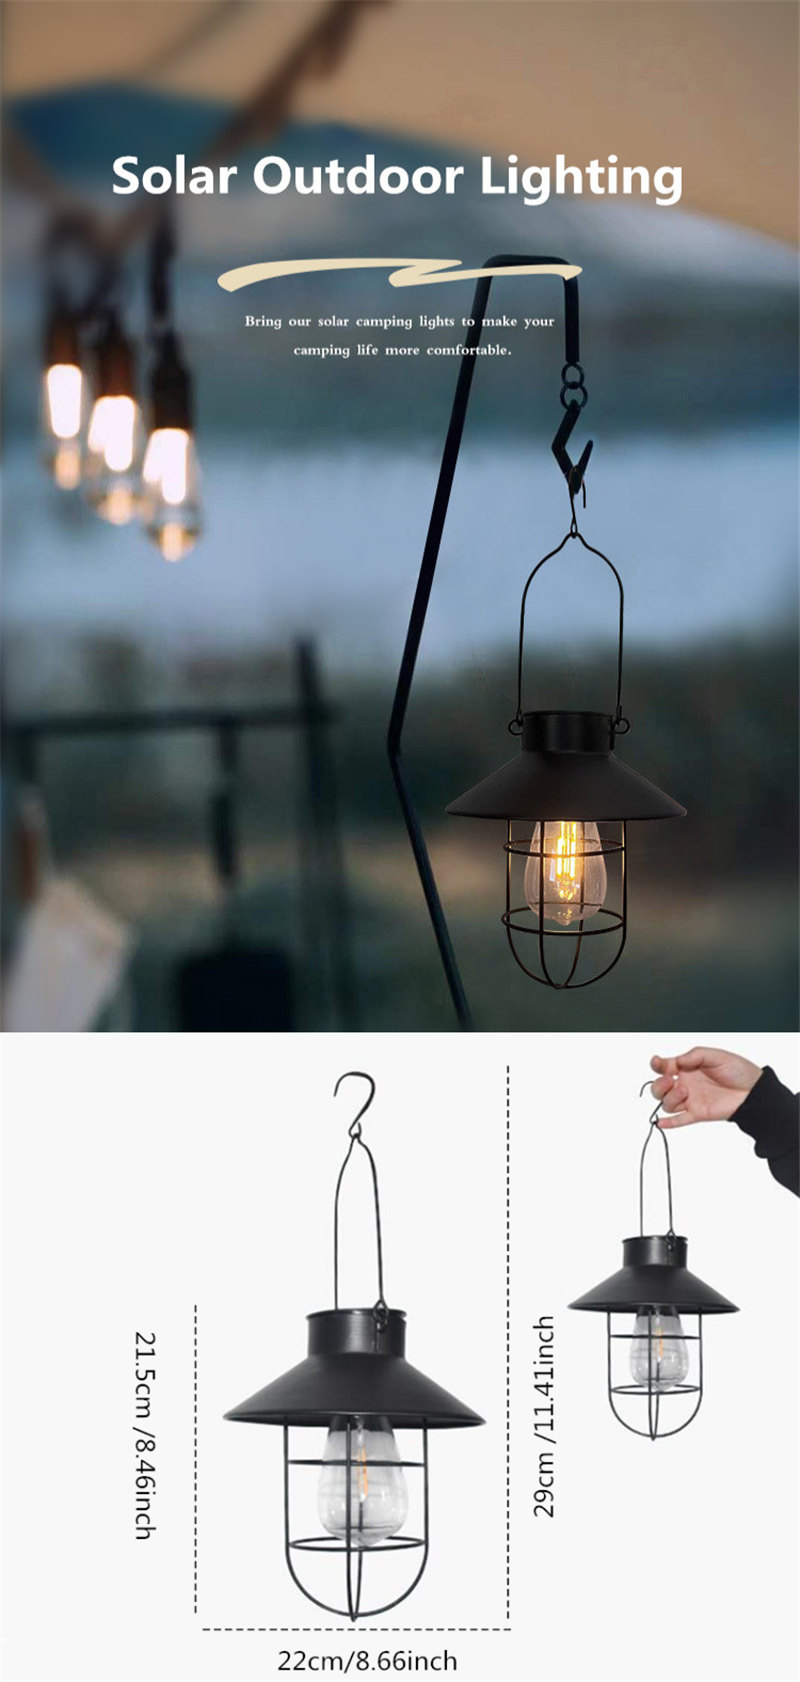 Camping-Tent-Light-Solar-Powered-Portable-Iron-Lantern-Rechargeable-Emergency-Lamp-Outdoor-Lighting-1930476-1